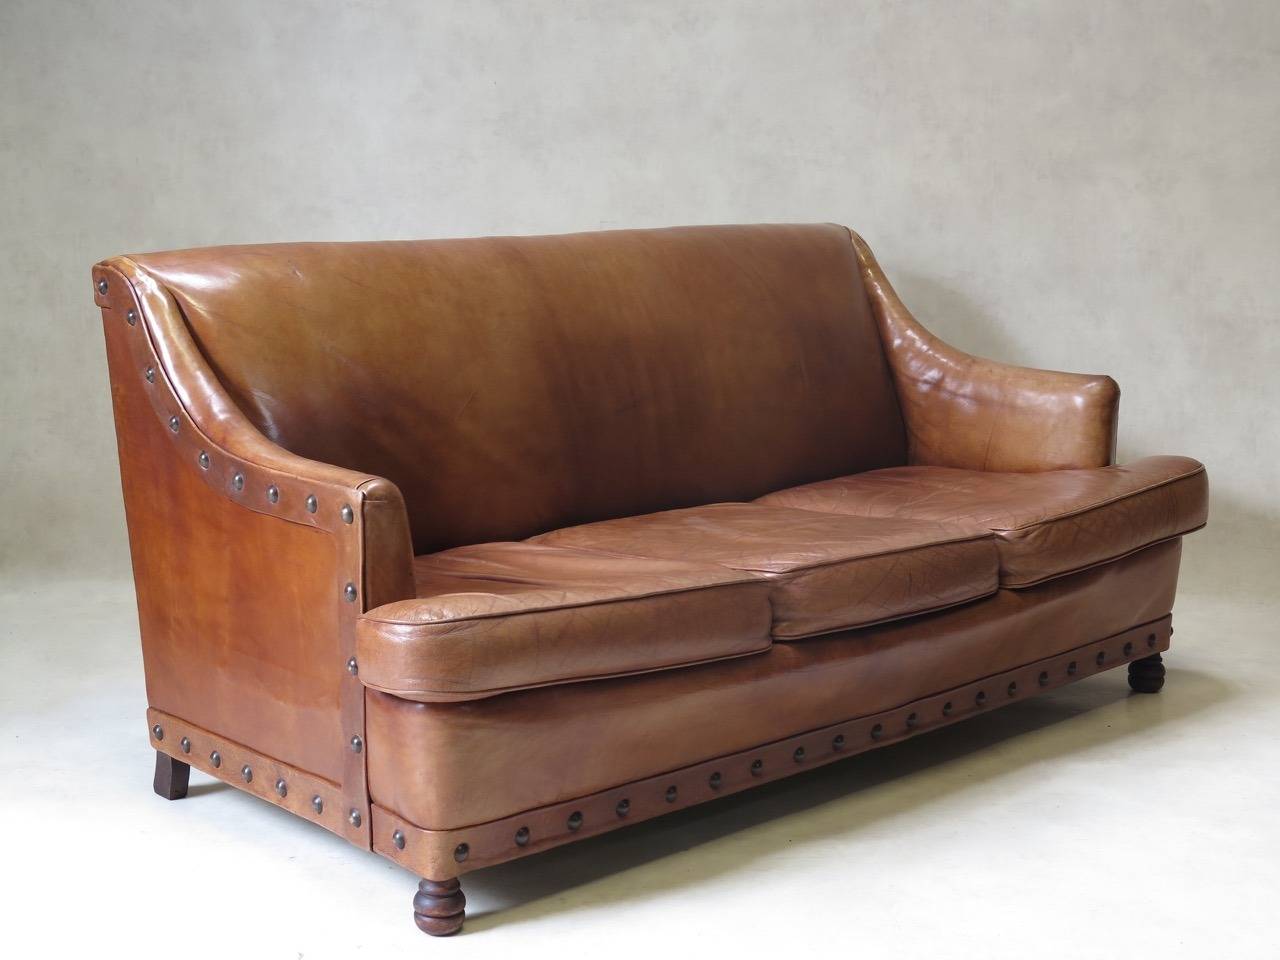 Comfortable and large living-room set comprised of two club chairs and a three-seat sofa (pull-out), upholstered in thick cognac-colored leather with large brass nail trim.

Dimensions provided below are for the settee. The armchairs measure (in